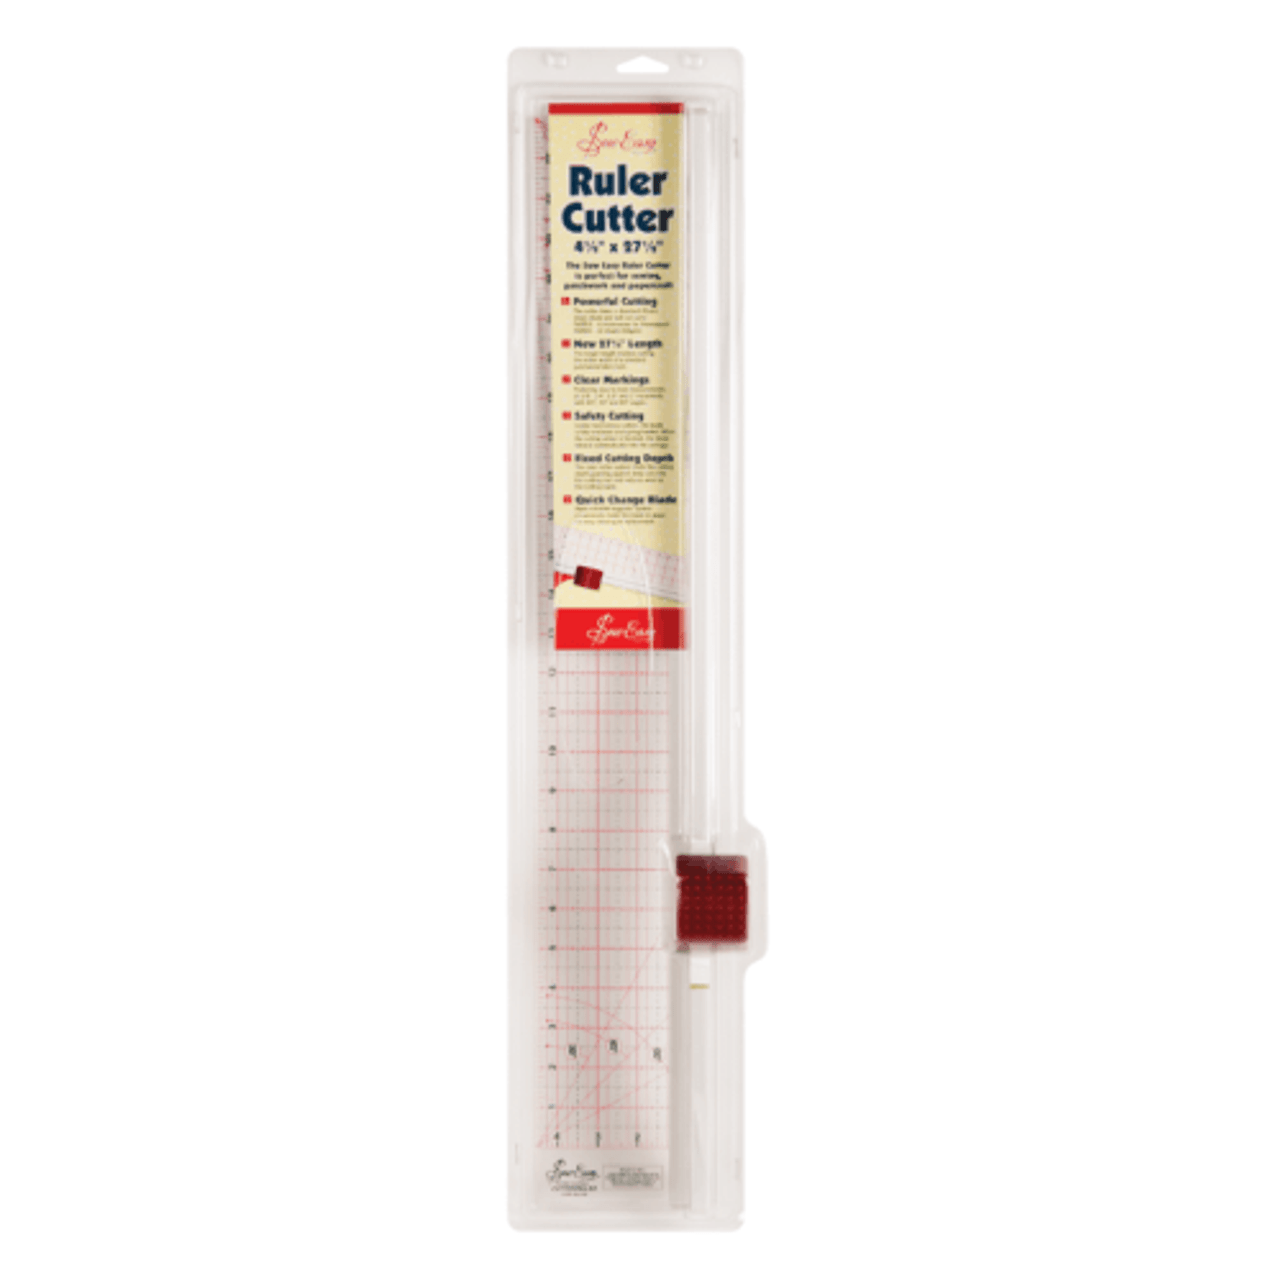 Sew Easy Ruler Cutter | Rotary Cutter and Ruler Tool 27.5" x 4.5"